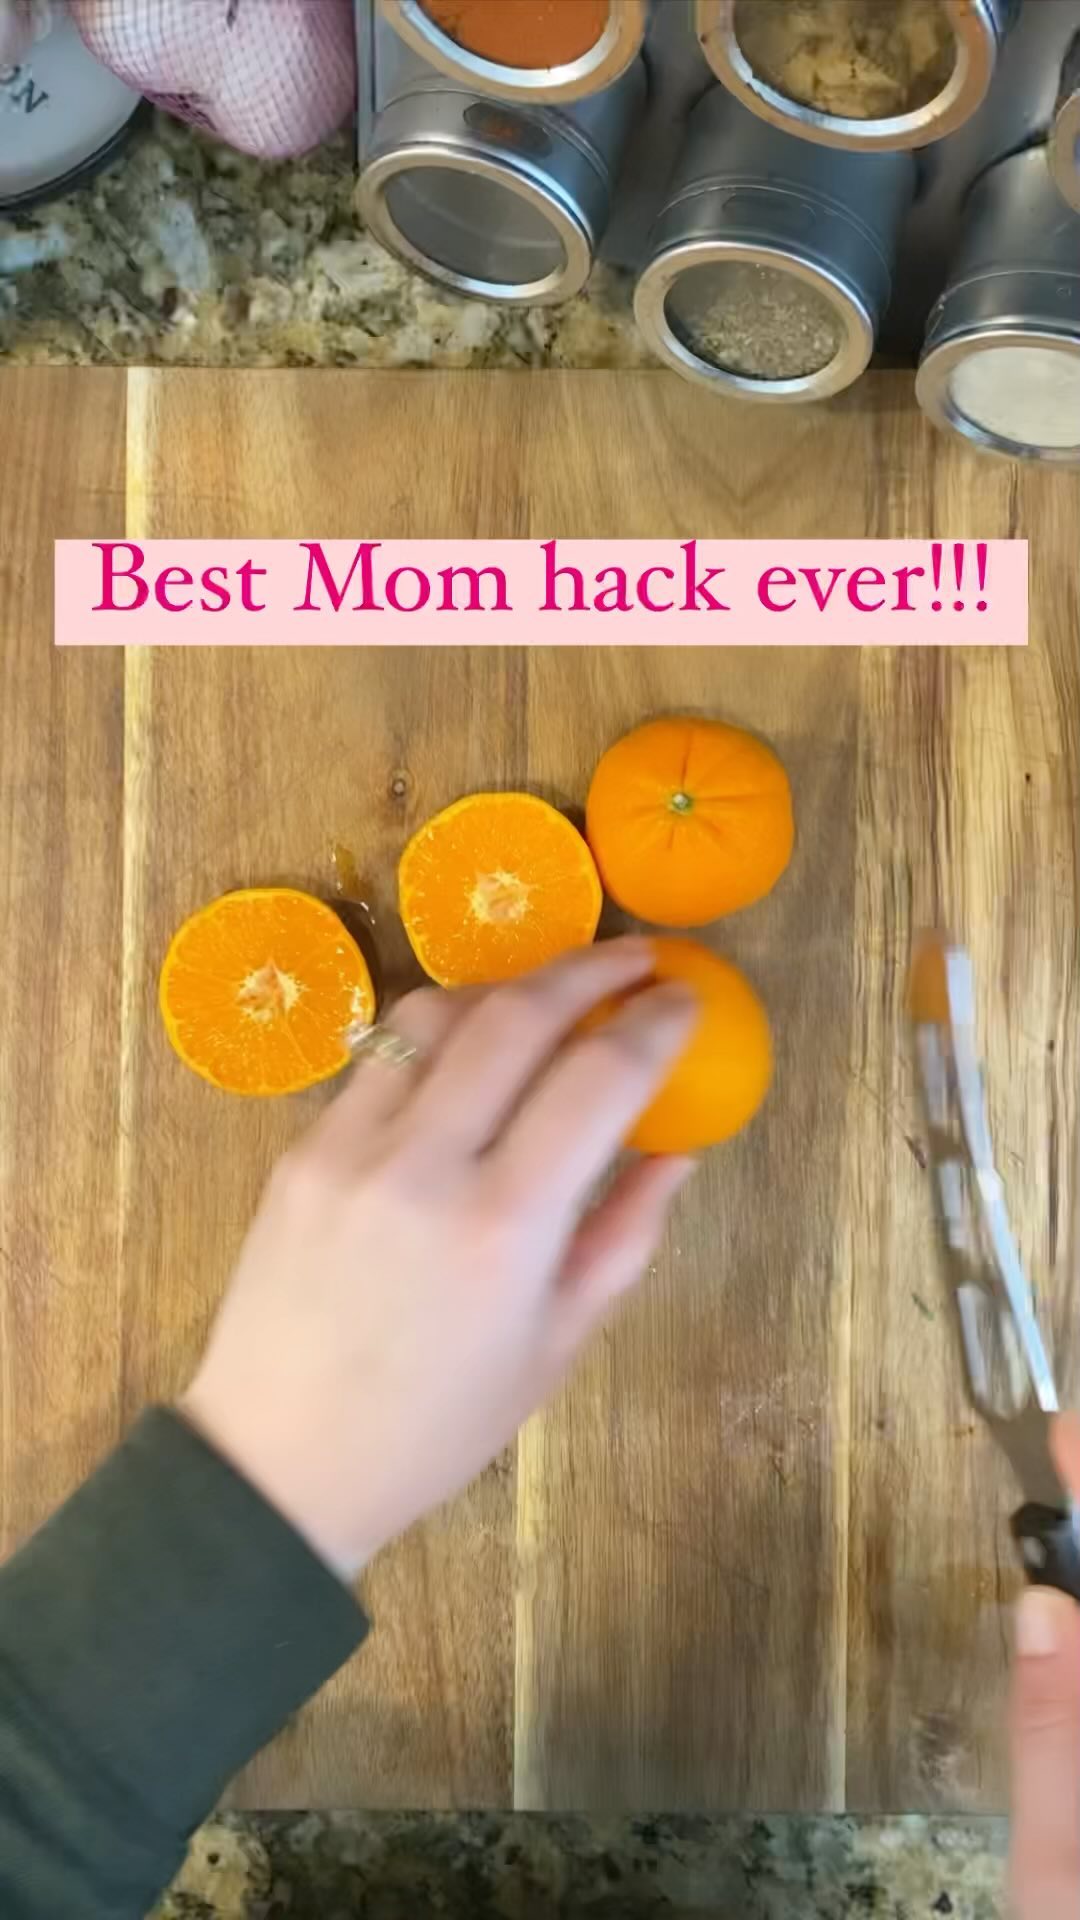 Check out this mom hack that can save you a few minutes!! #lookingoutforyou #cuties #oranges #toddlerlife #toddlermom #toddlersnacks #fruit #simplysellskitchen #food #timesaver #treatyoself #foodhack #mothersday #mother #food #motherhood #kidsnacks #afterschoolsnack #easyhack #momhacks #parenting #momlife #foodbloggers #instahacks